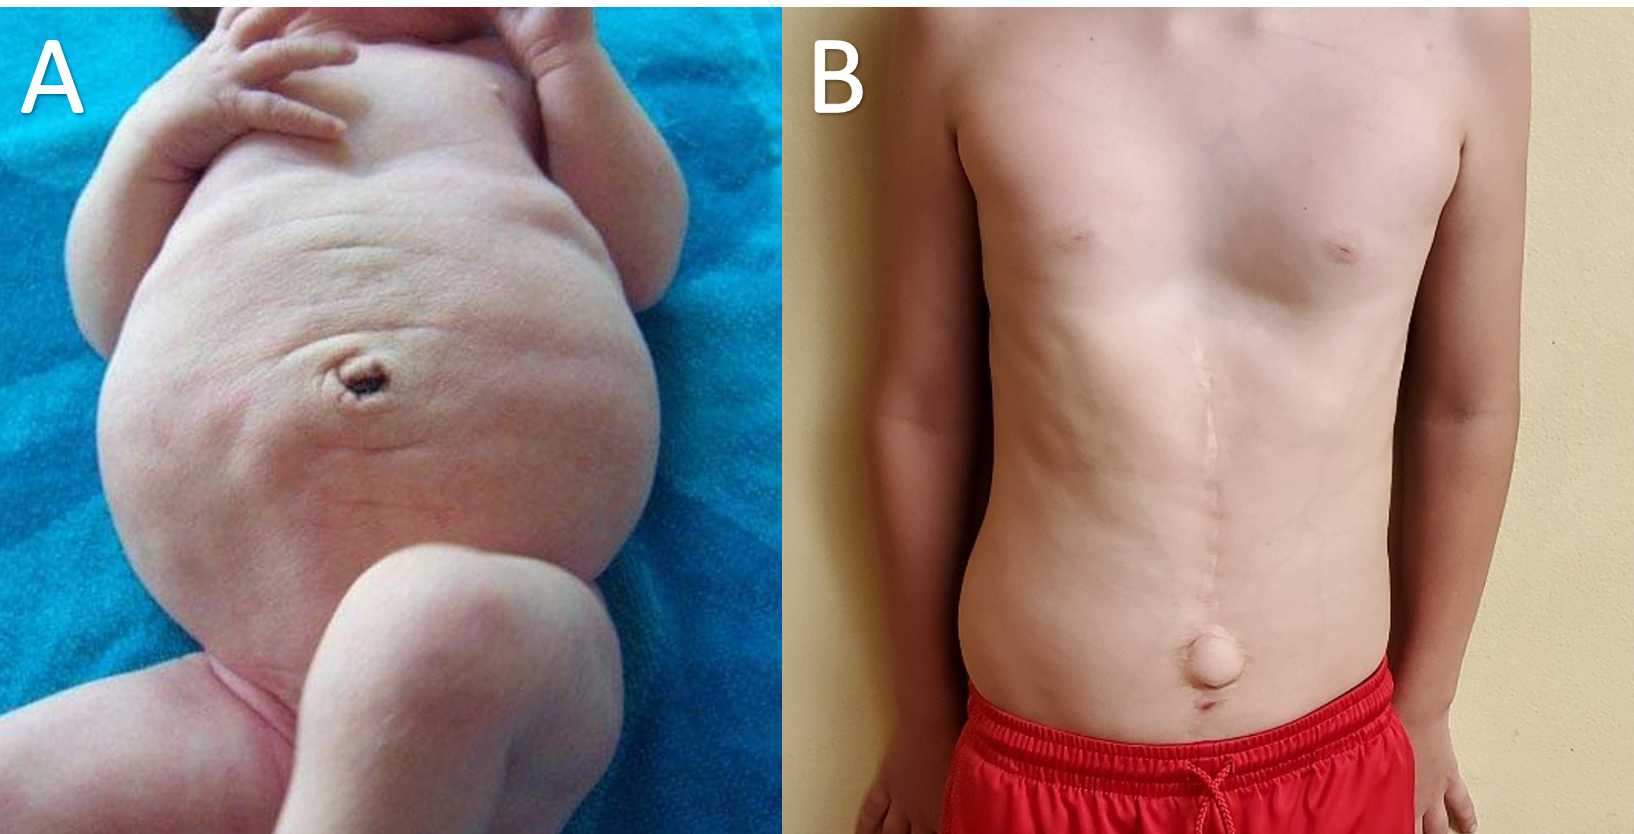 Prune belly syndrome - A. At birth B. At nine years of age (surgical scars noted from a prior abdominoplasty procedure)